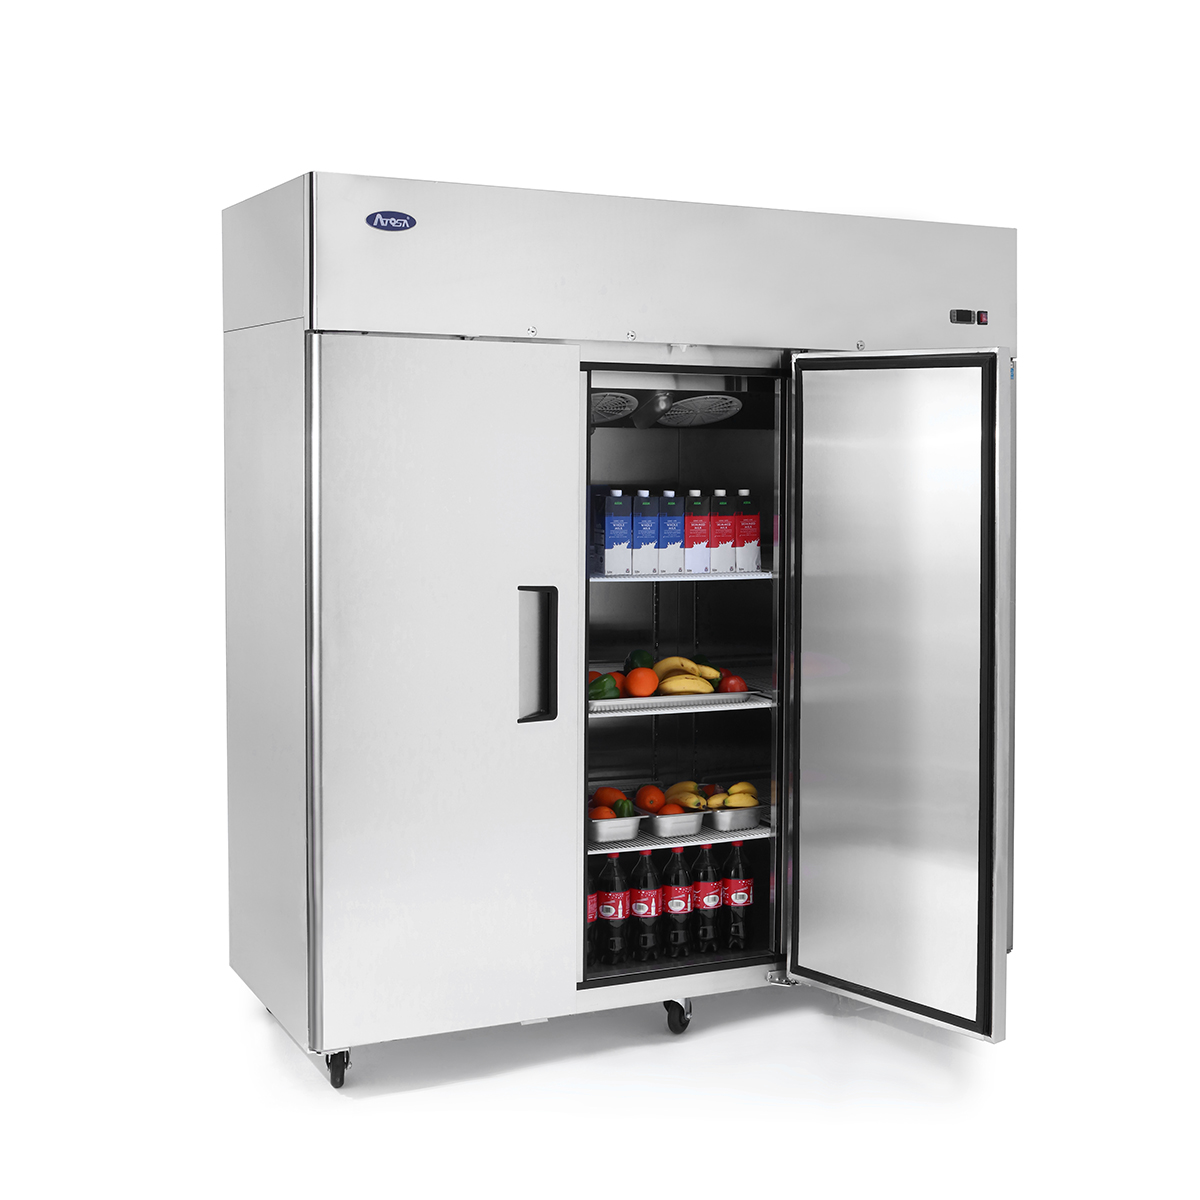 Atosa MBF8006GR Reach-In 3 Section Top Mount Refrigerator 77-3/4"W x 33-1/4"D x 82-7/8"H with 3 Locking Solid Doors image 1